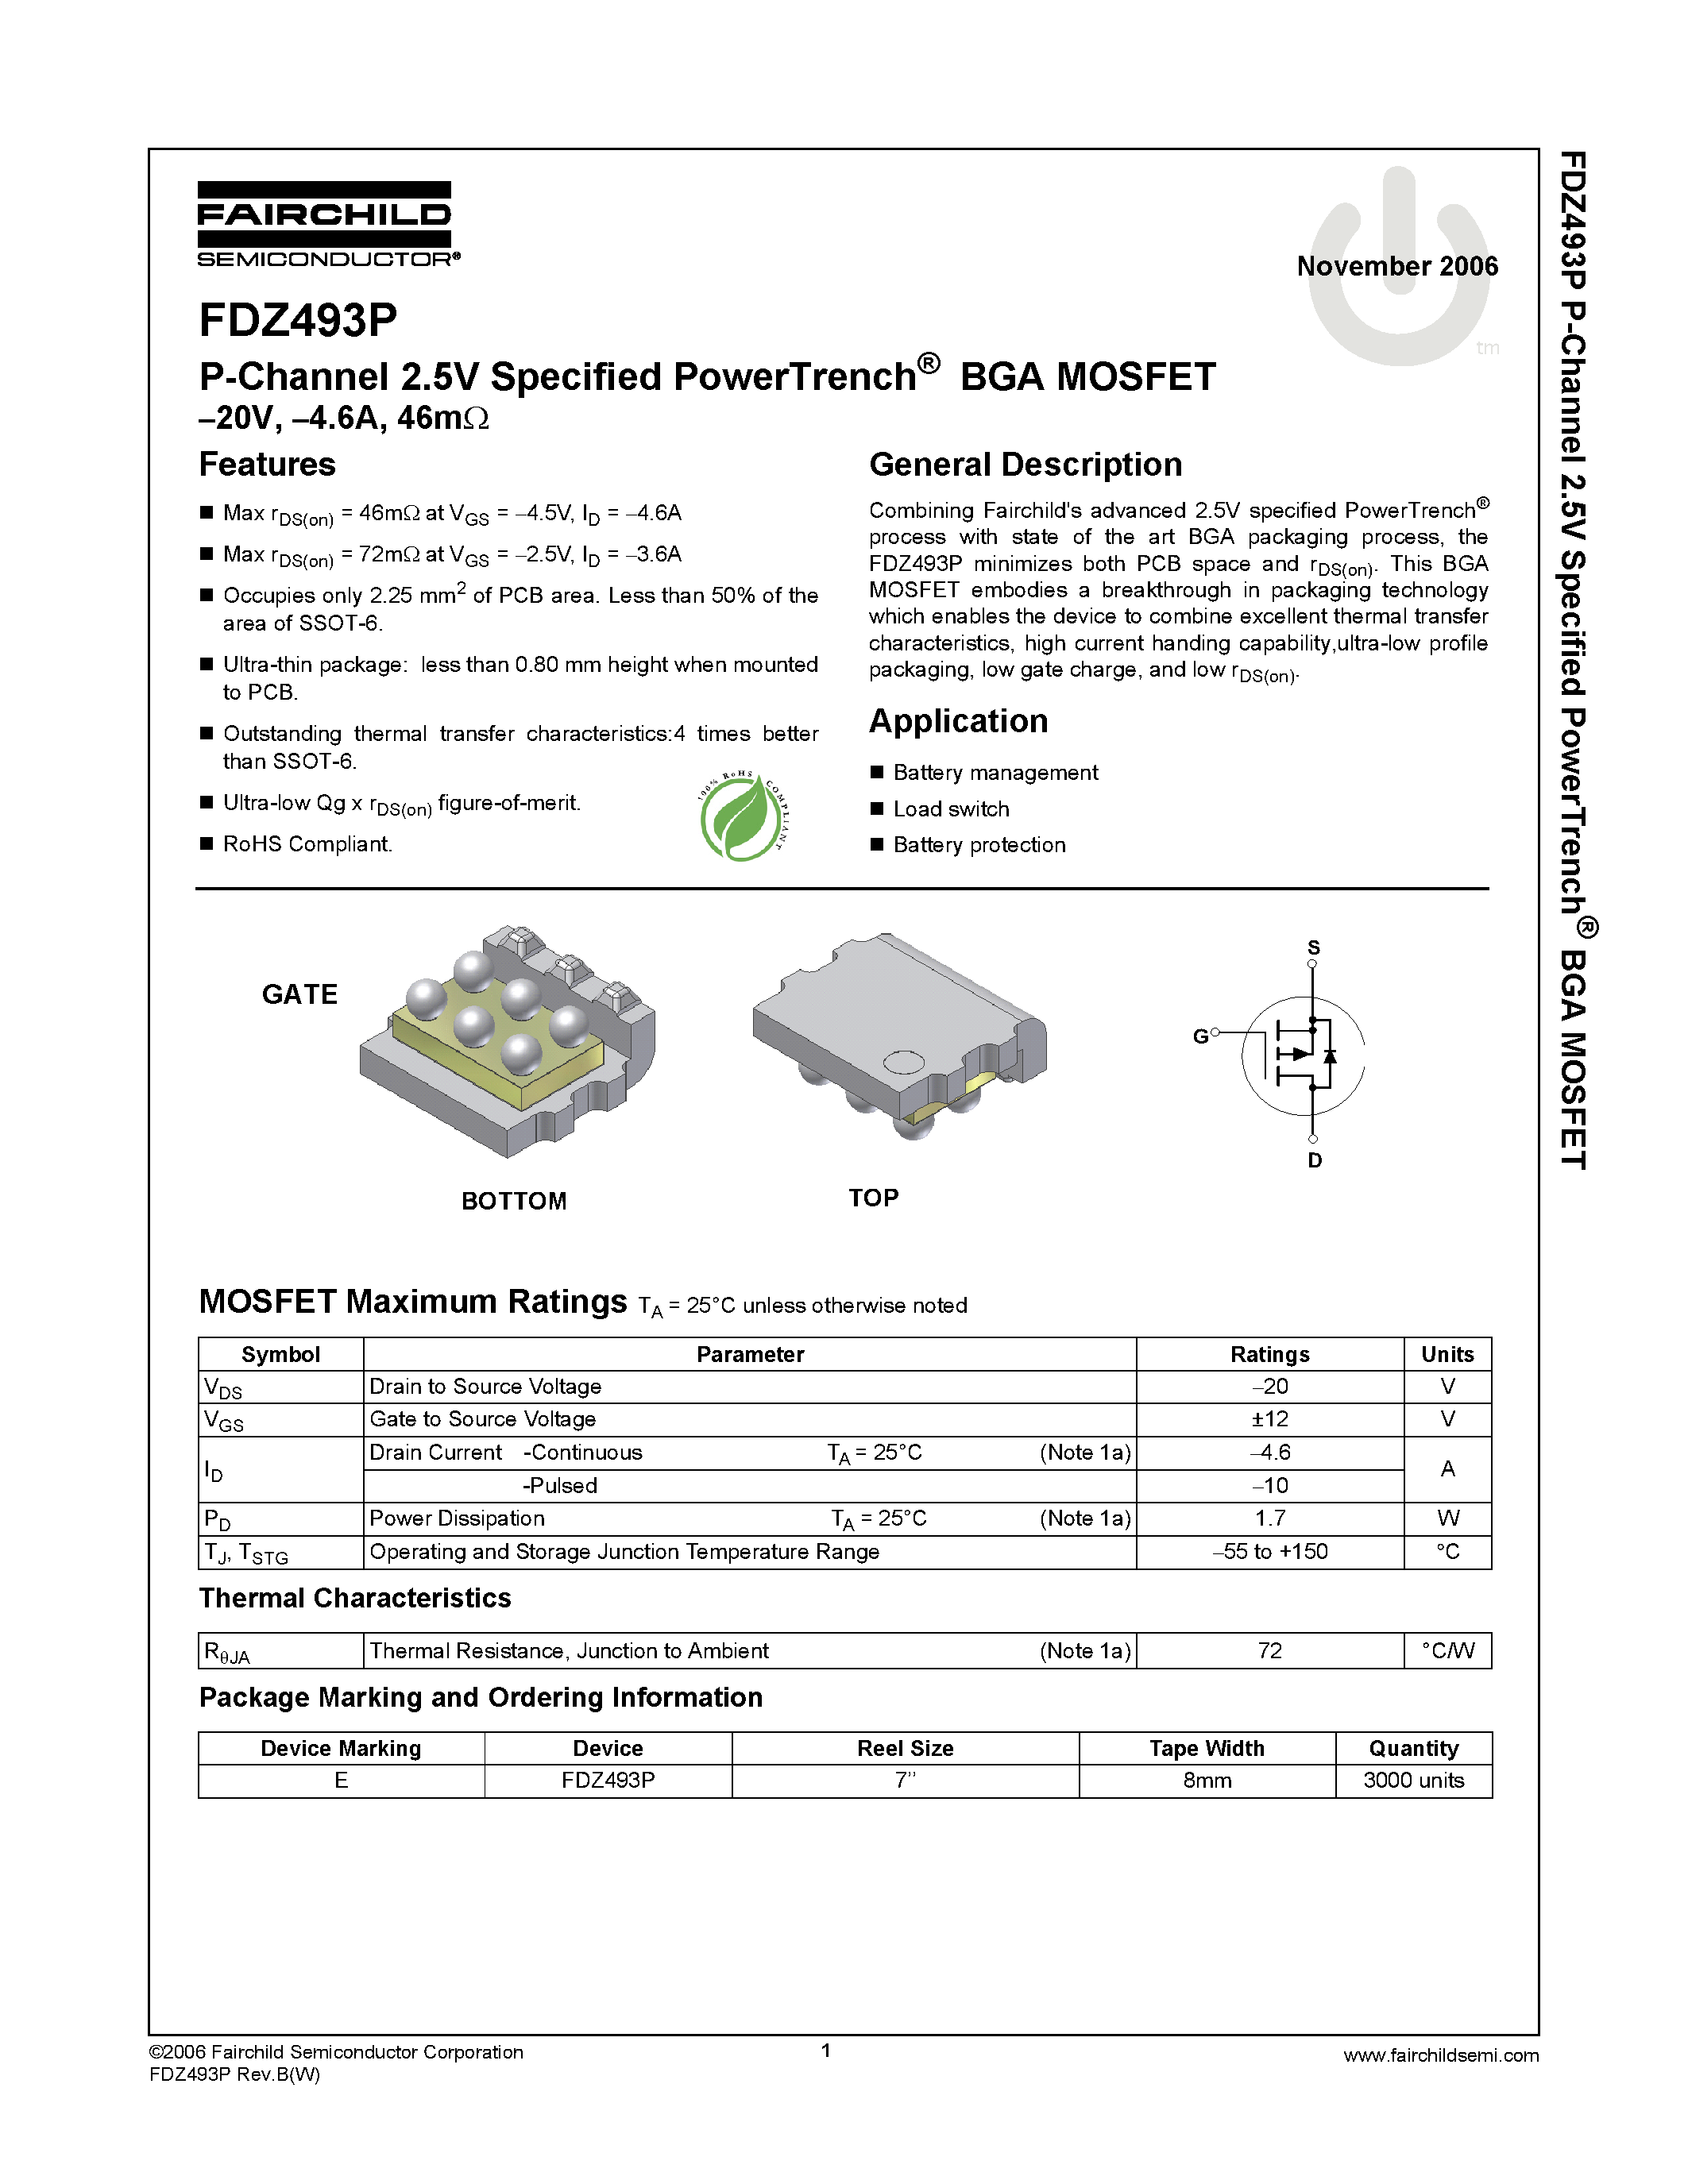 Datasheet FDZ493P - P-Channel 2.5V Specified PowerTrench BGA MOSFET page 1